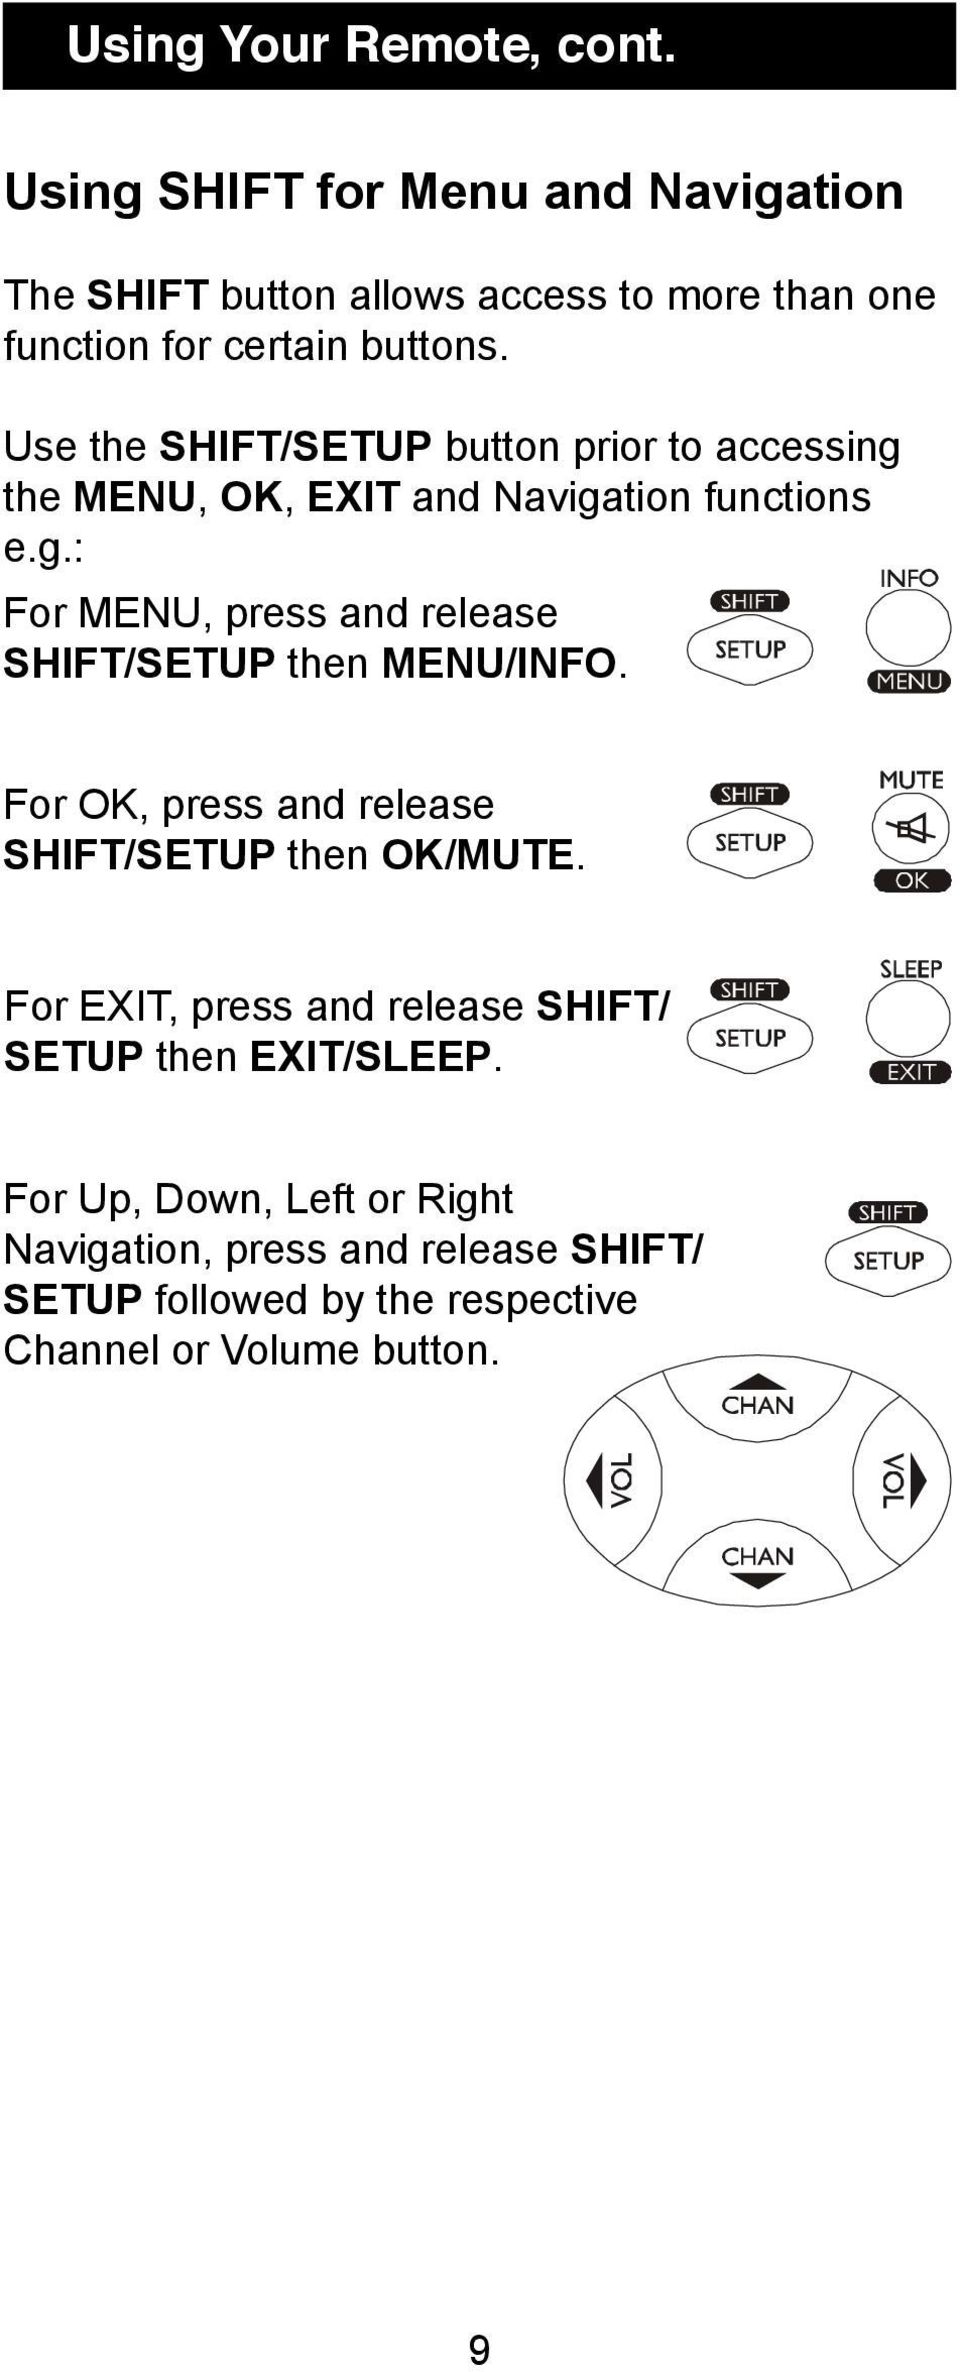 Use the SHIFT/SETUP button prior to accessing the MENU, OK, EXIT and Navigation functions e.g.: For MENU, press and release SHIFT/SETUP then MENU/INFO.